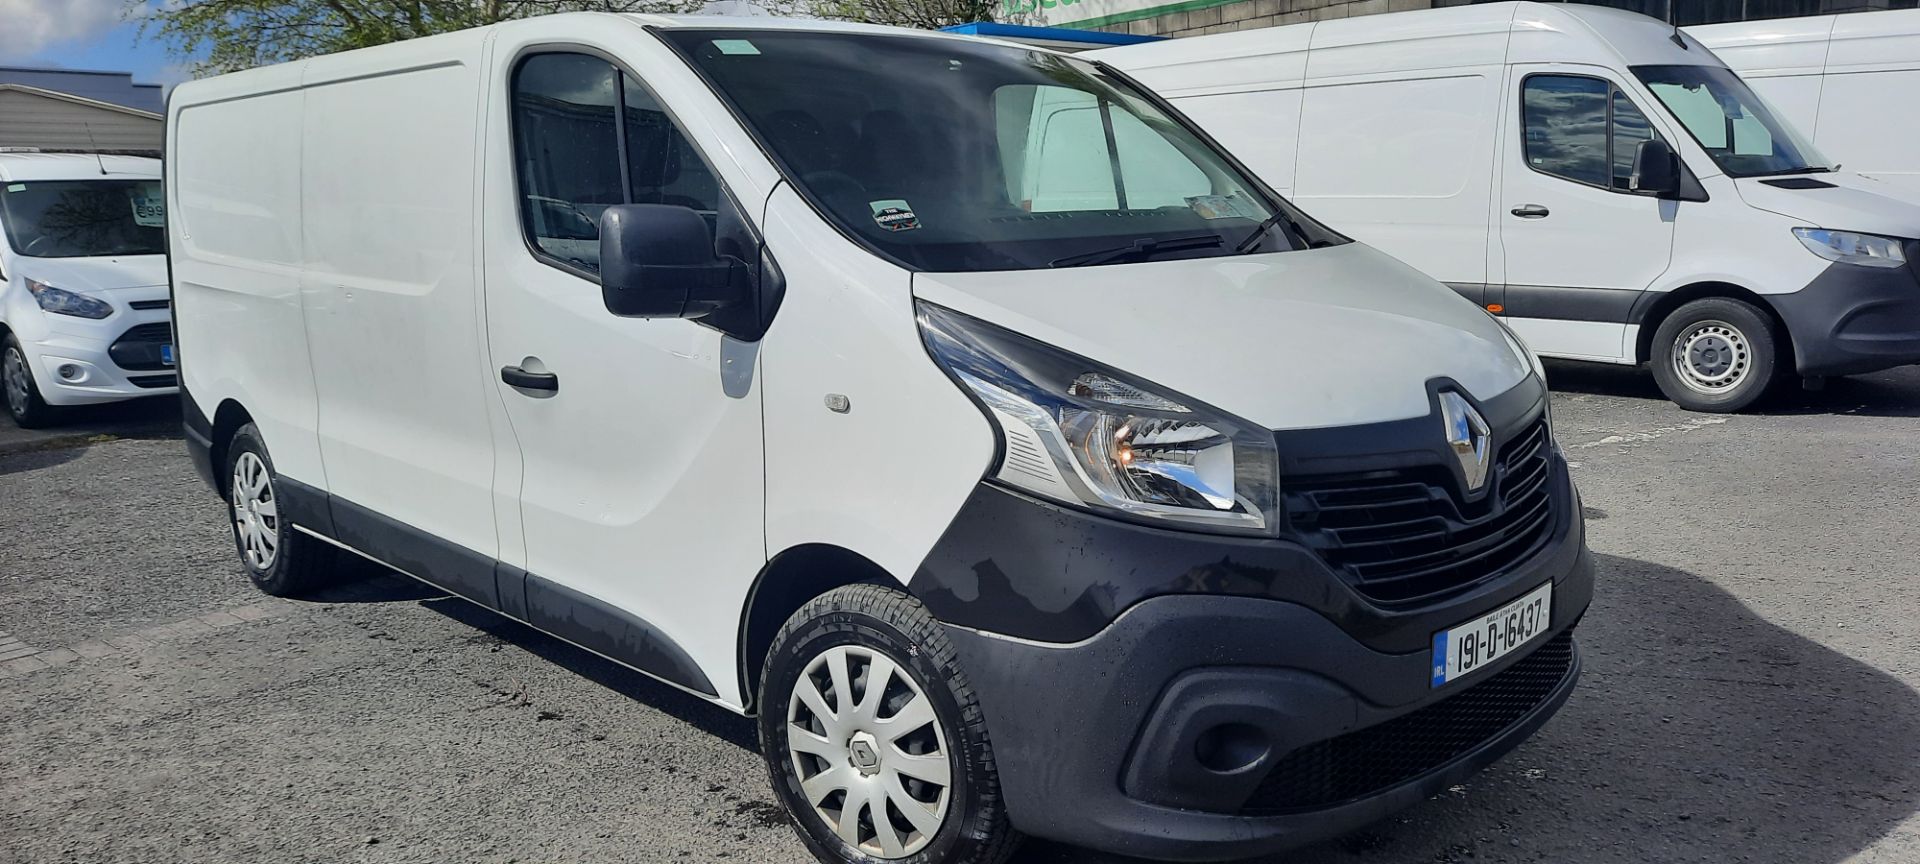 2019 Renault Trafic LL29 DCI 120 Business (191D16437)